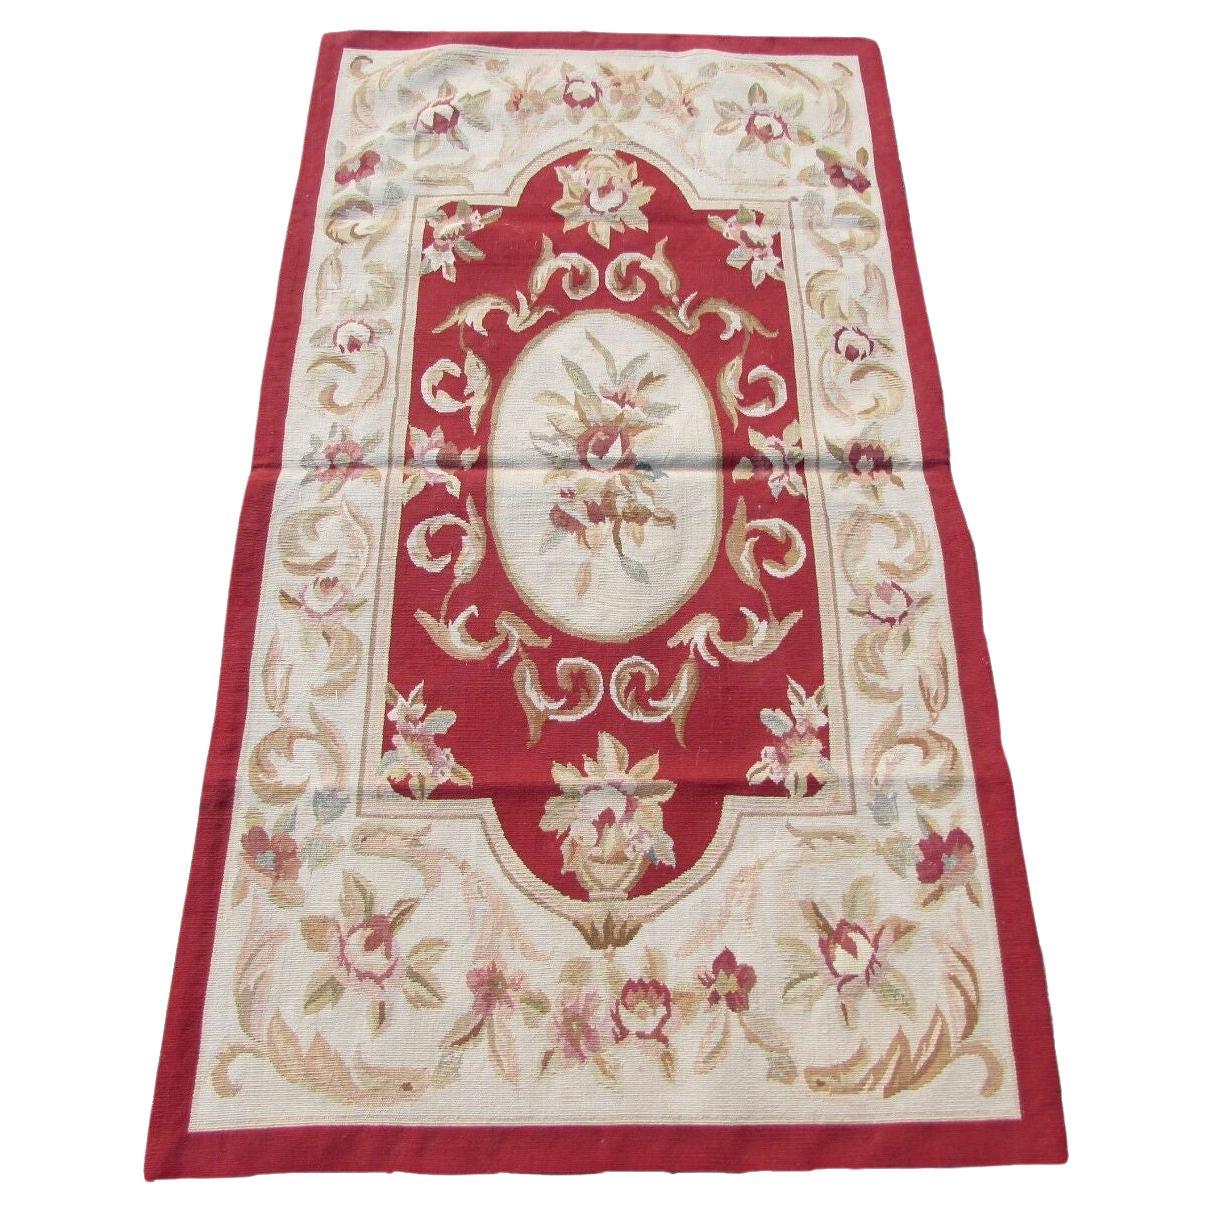 Handmade Vintage French Aubusson Rug 2.6' x 4.7', 1980s, 1Q38 For Sale